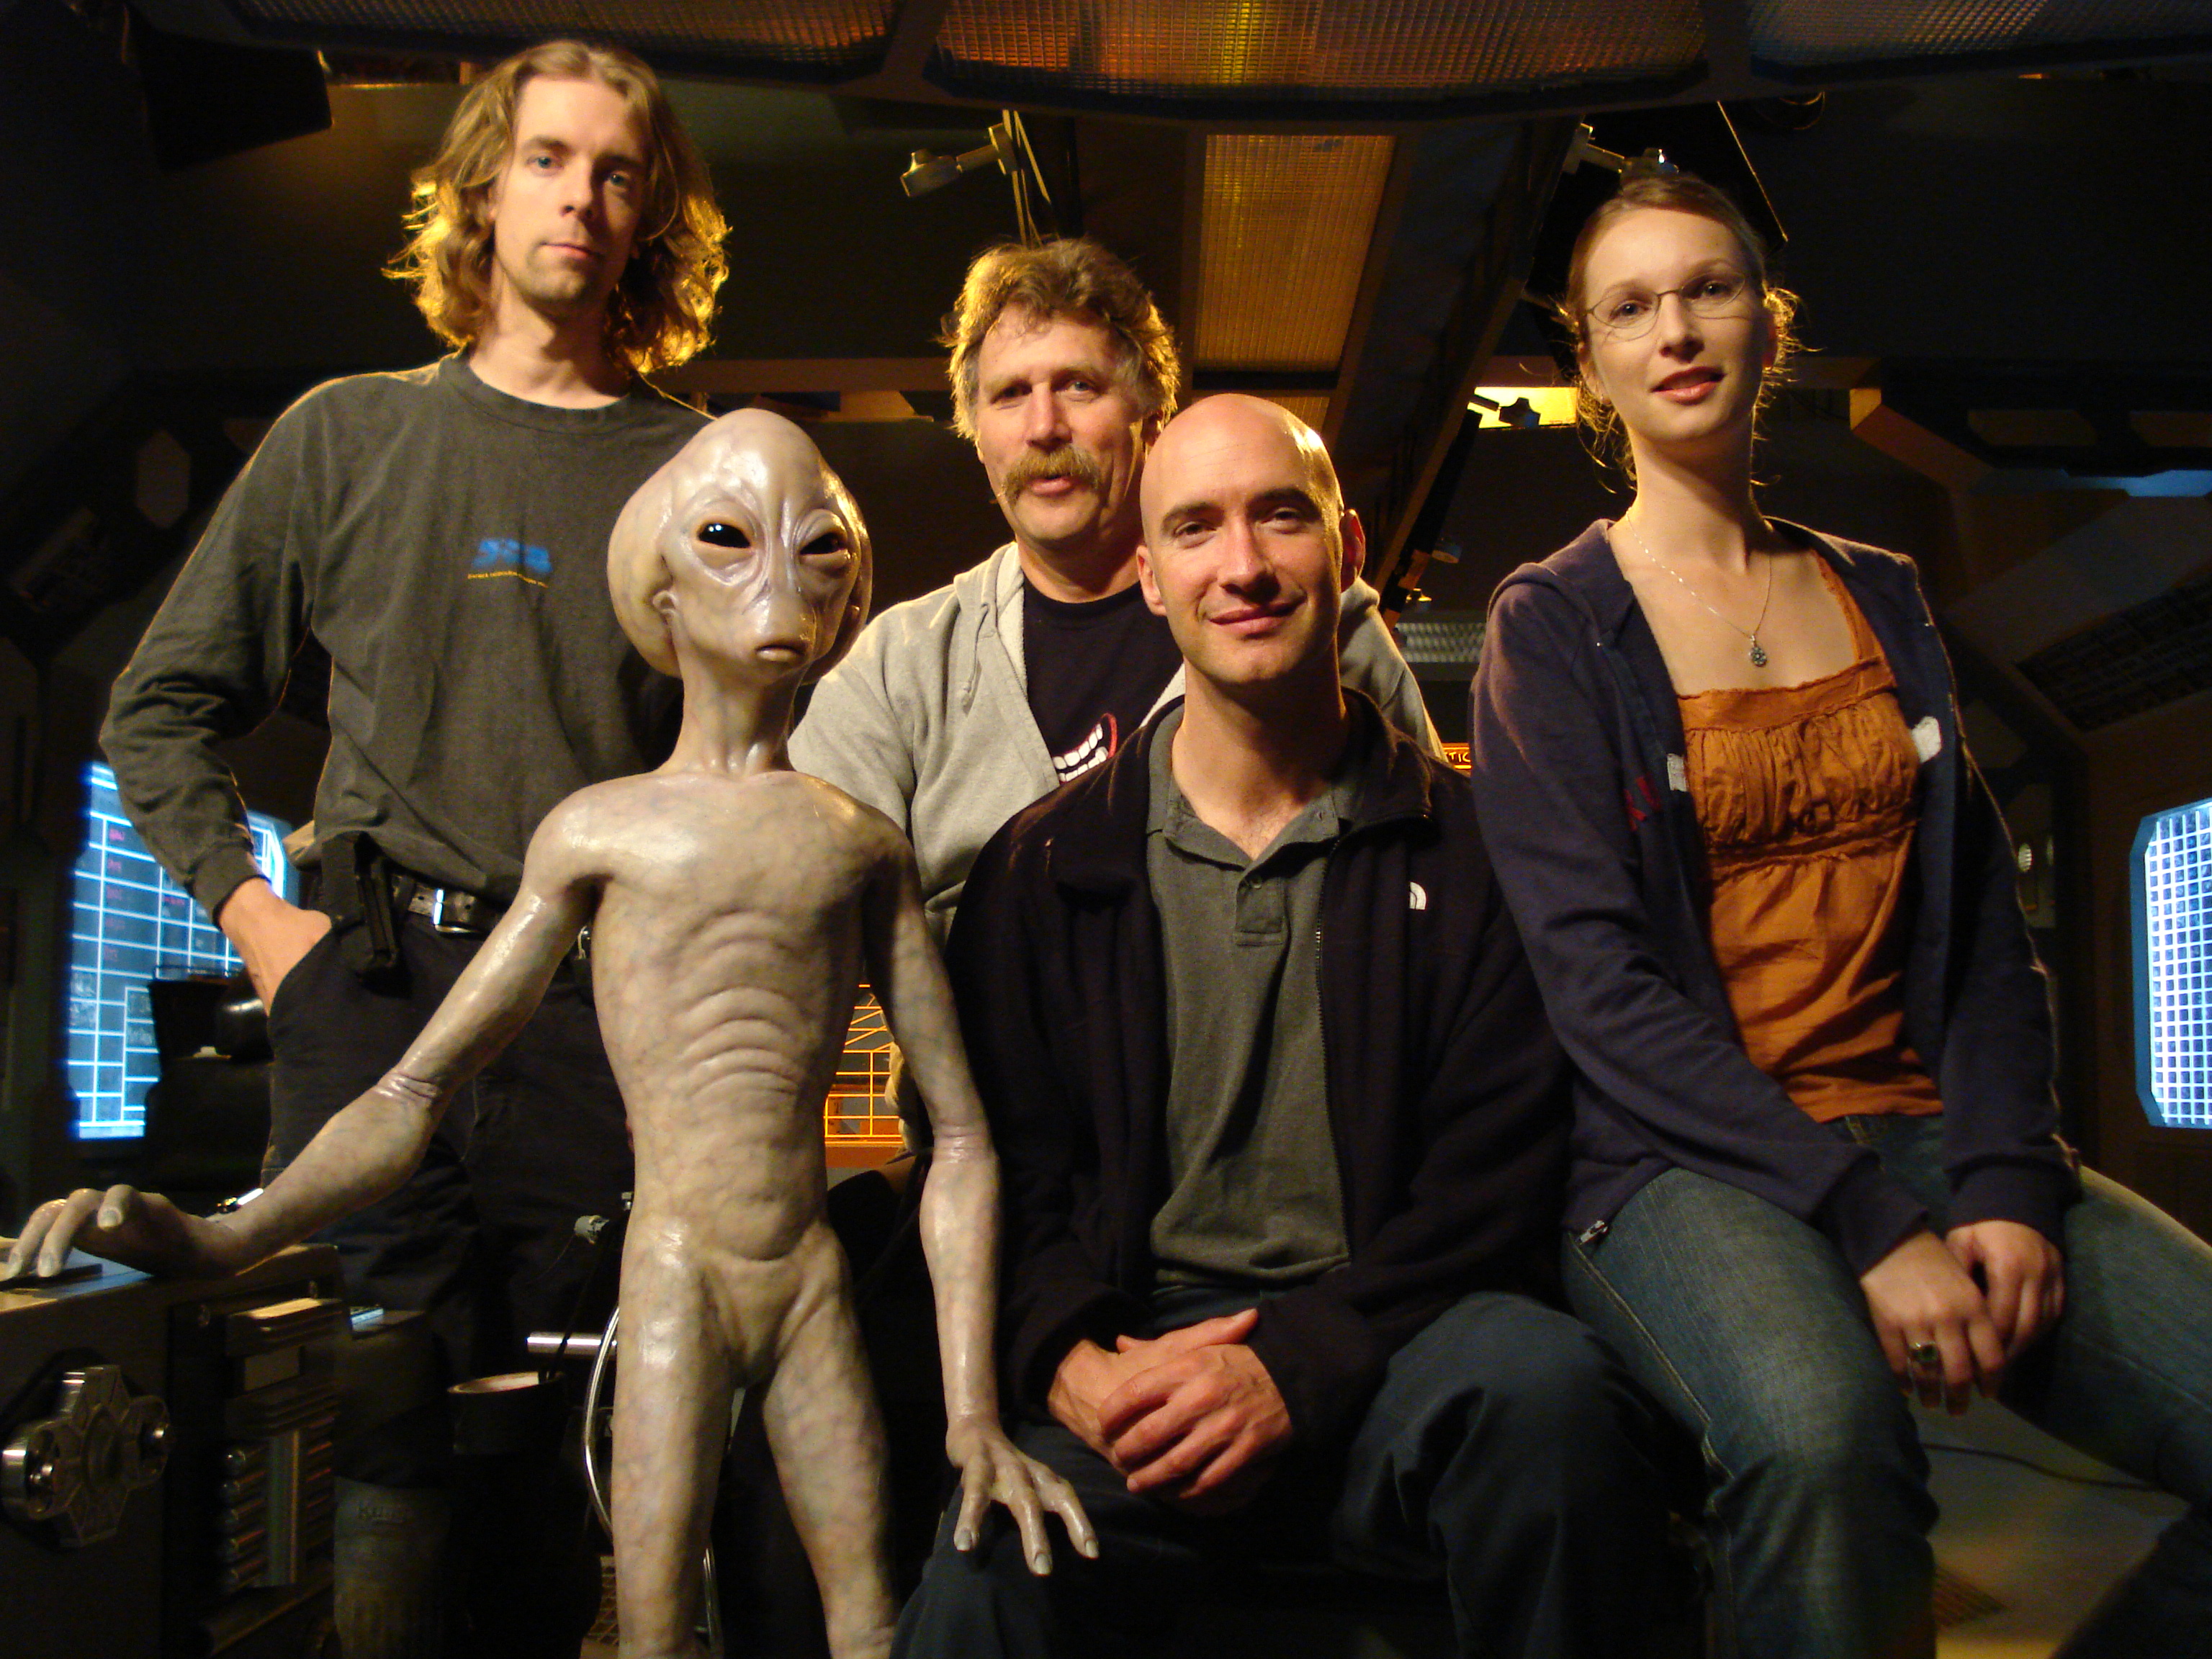 With Thor the Asgard and the operating crew on set of Stargate SG-1. Geoff Redknap, Paul Hooson, Morris Chapdelaine, Jeny Cassady